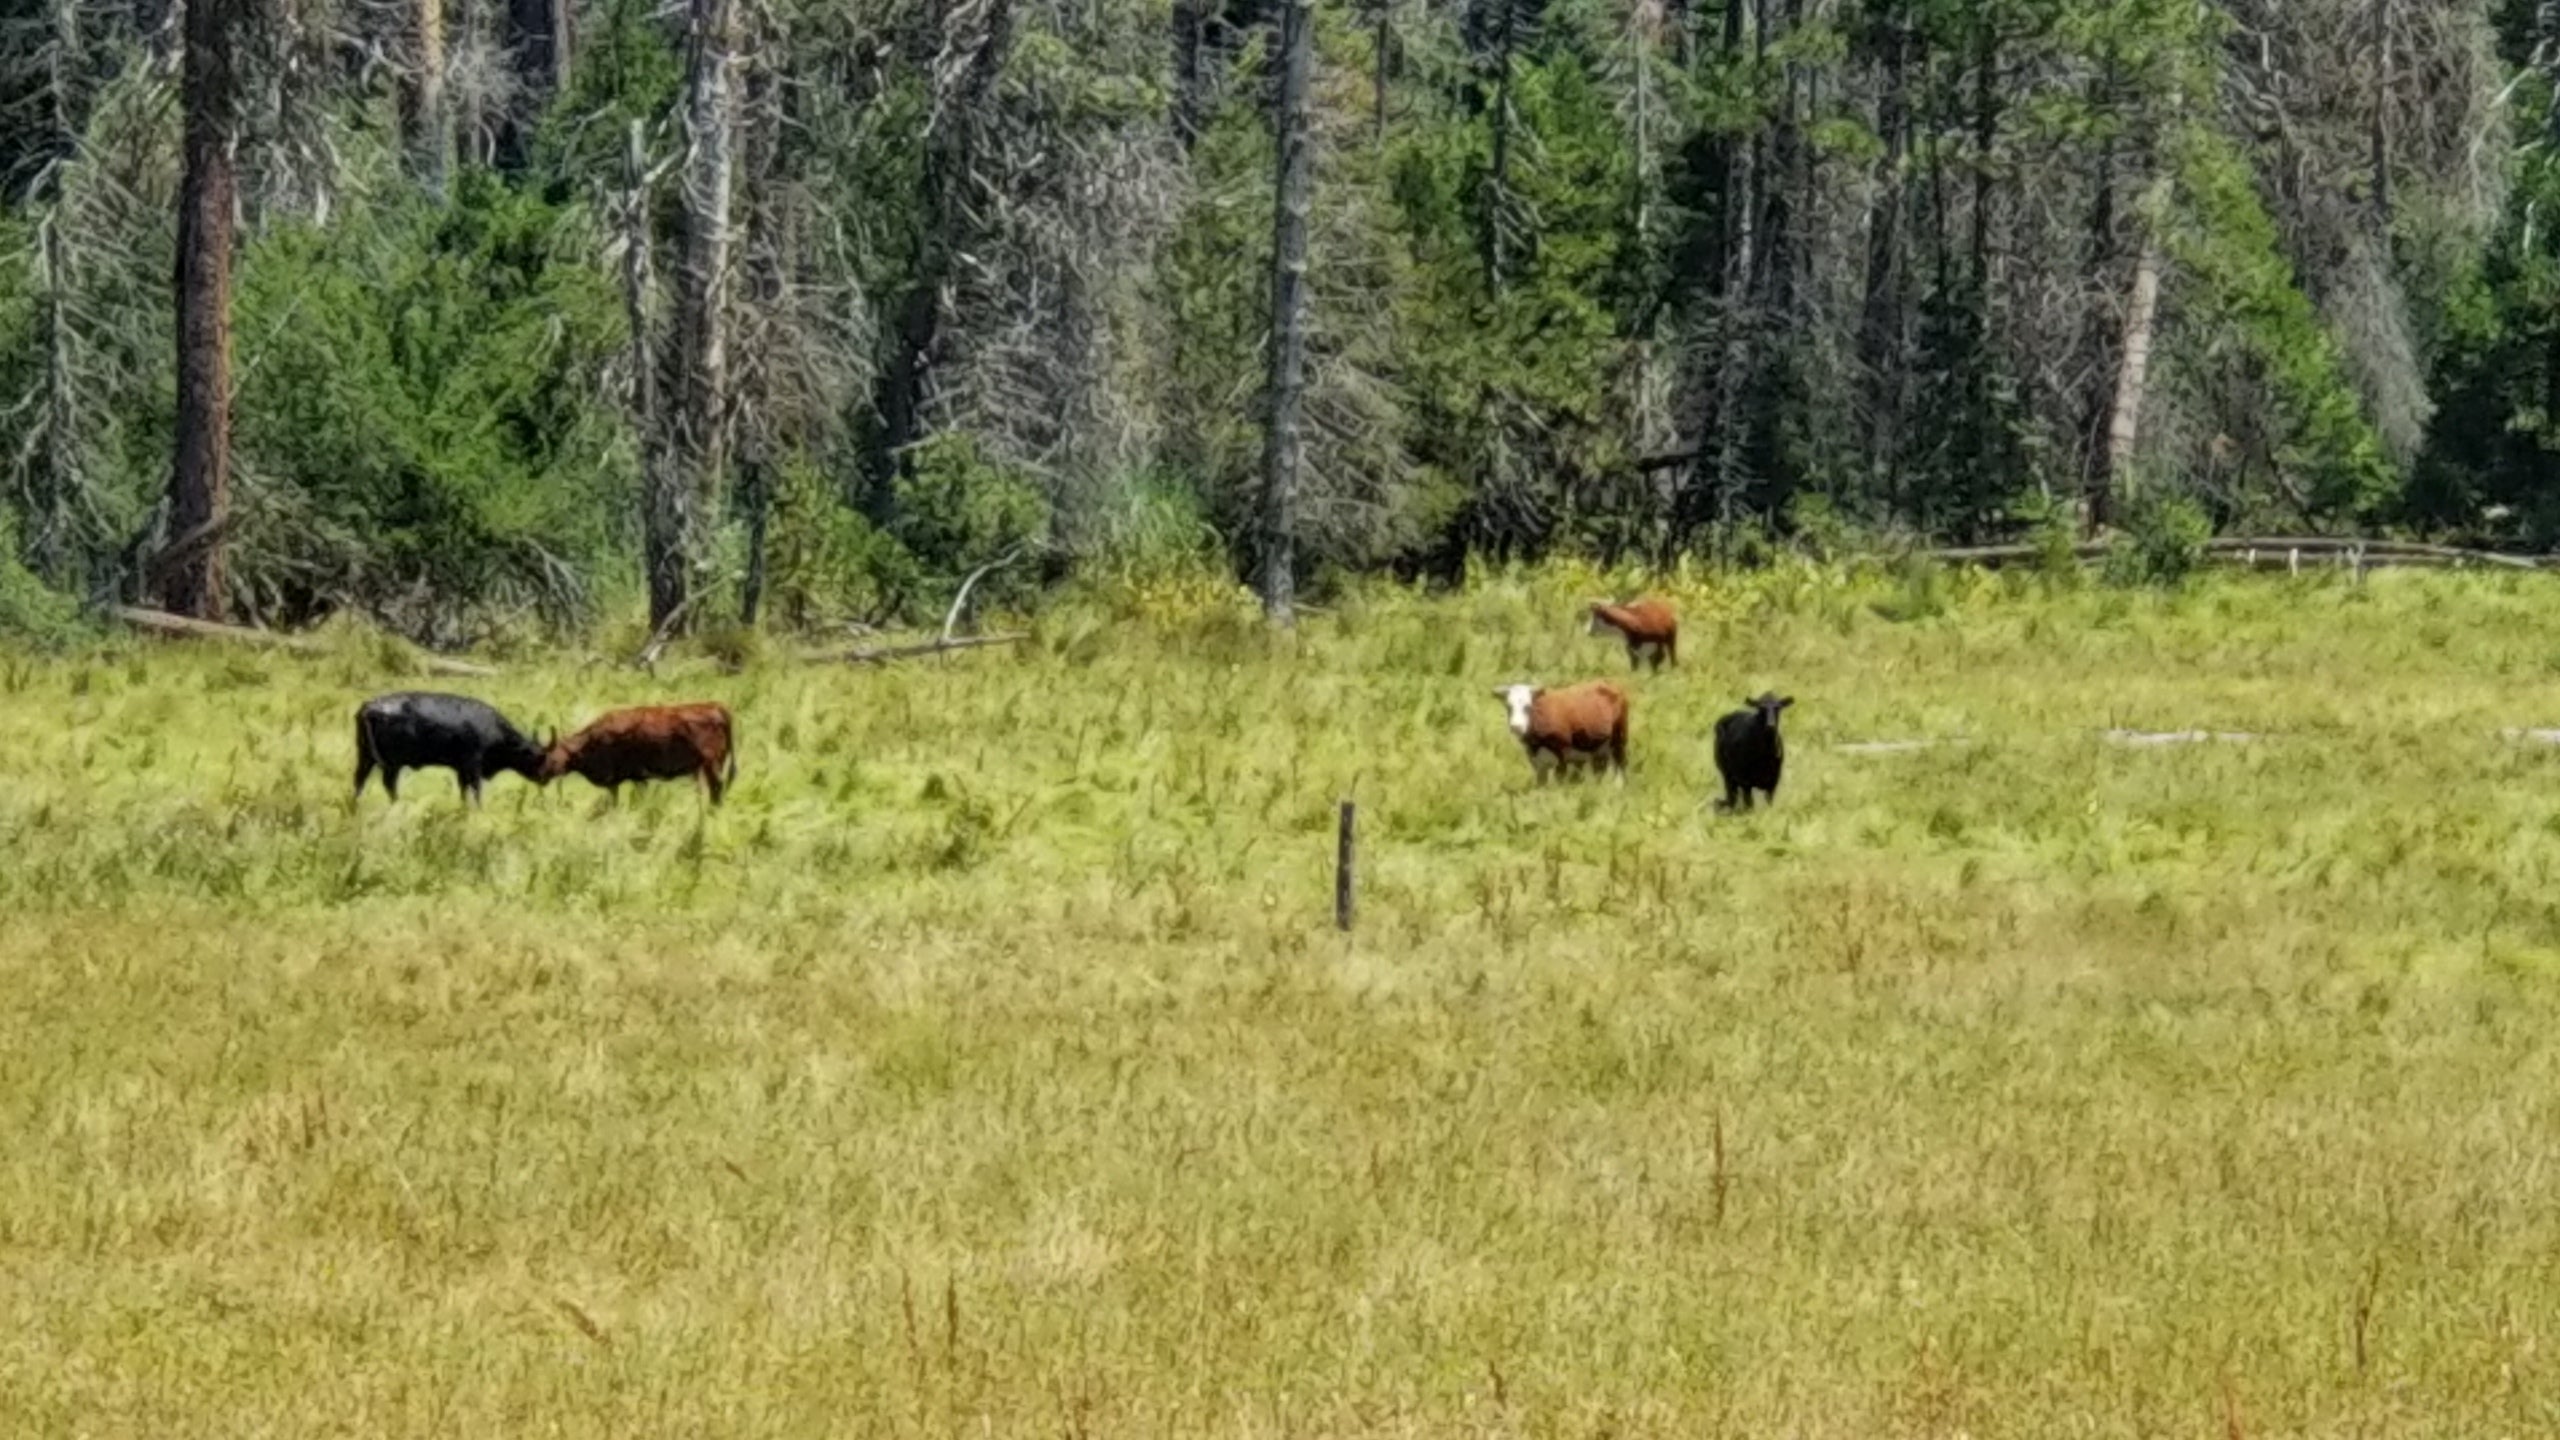 Cows in the nearby meadow.